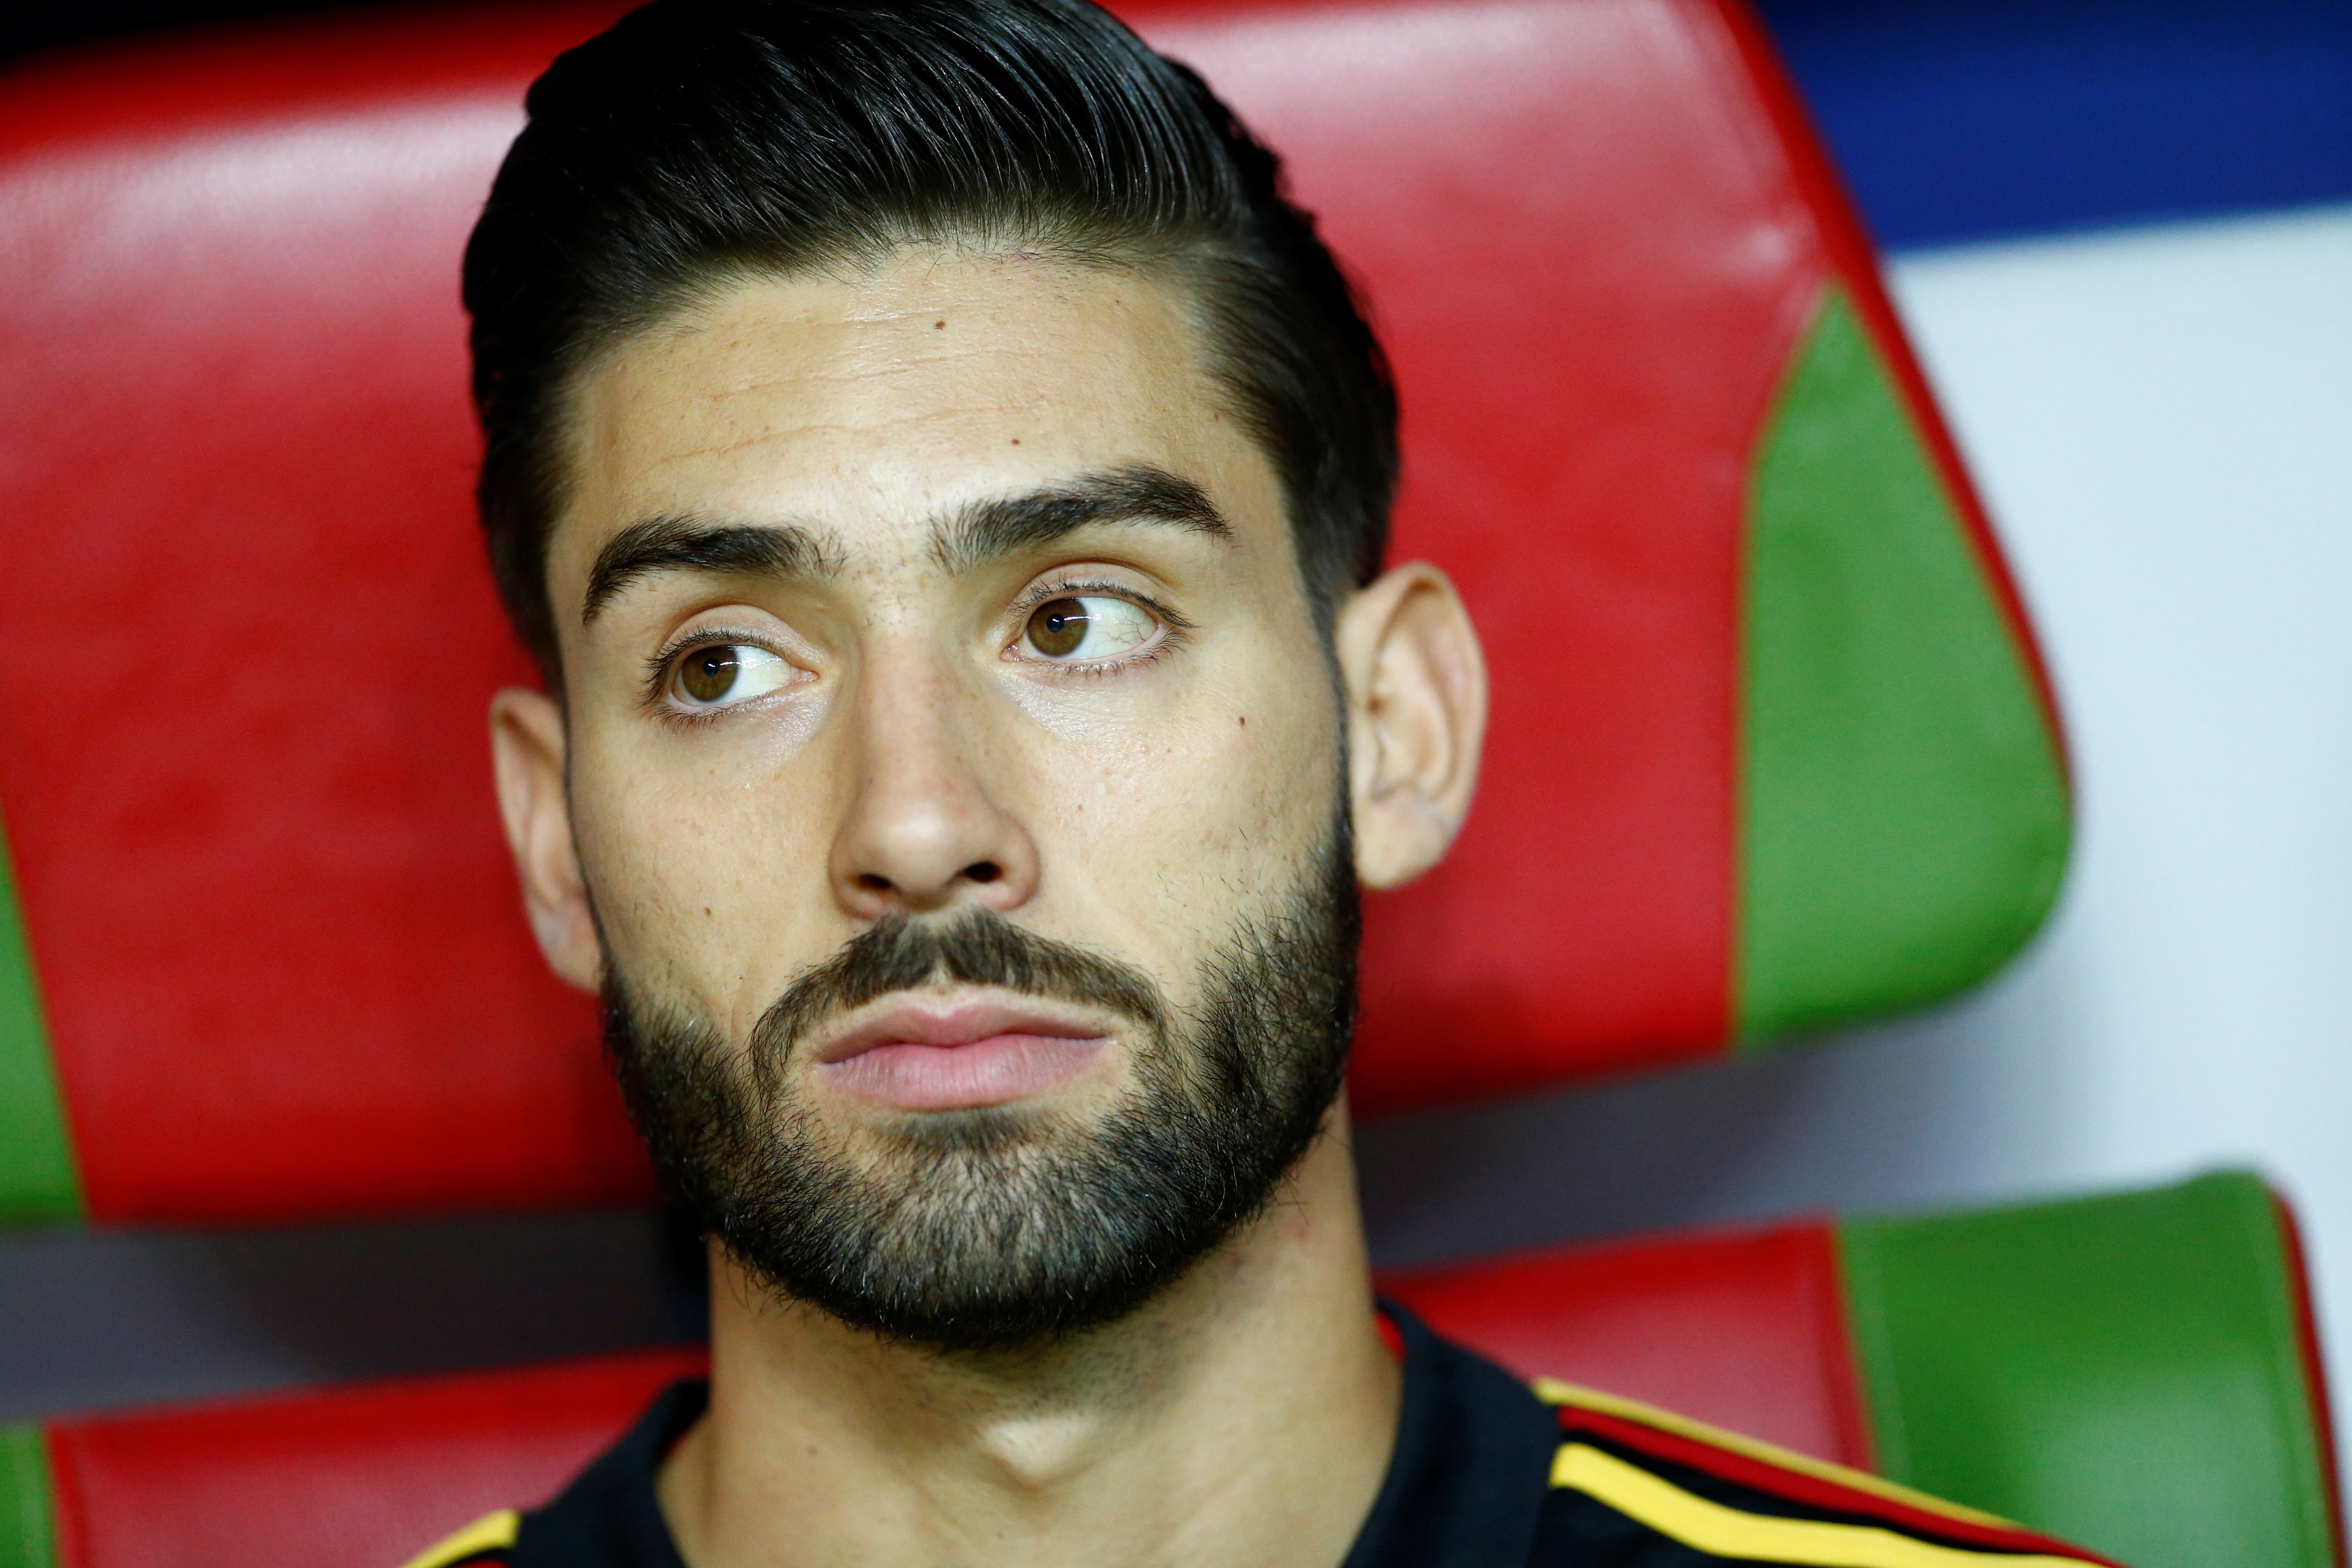 Belgium's midfielder Yannick Ferreira-Carrasco sits on the bench during the Russia 2018 World Cup quarter-final football match between Brazil and Belgium at the Kazan Arena in Kazan on July 6, 2018. (Photo by BENJAMIN CREMEL / AFP) / RESTRICTED TO EDITORIAL USE - NO MOBILE PUSH ALERTS/DOWNLOADS        (Photo credit should read BENJAMIN CREMEL/AFP/Getty Images)